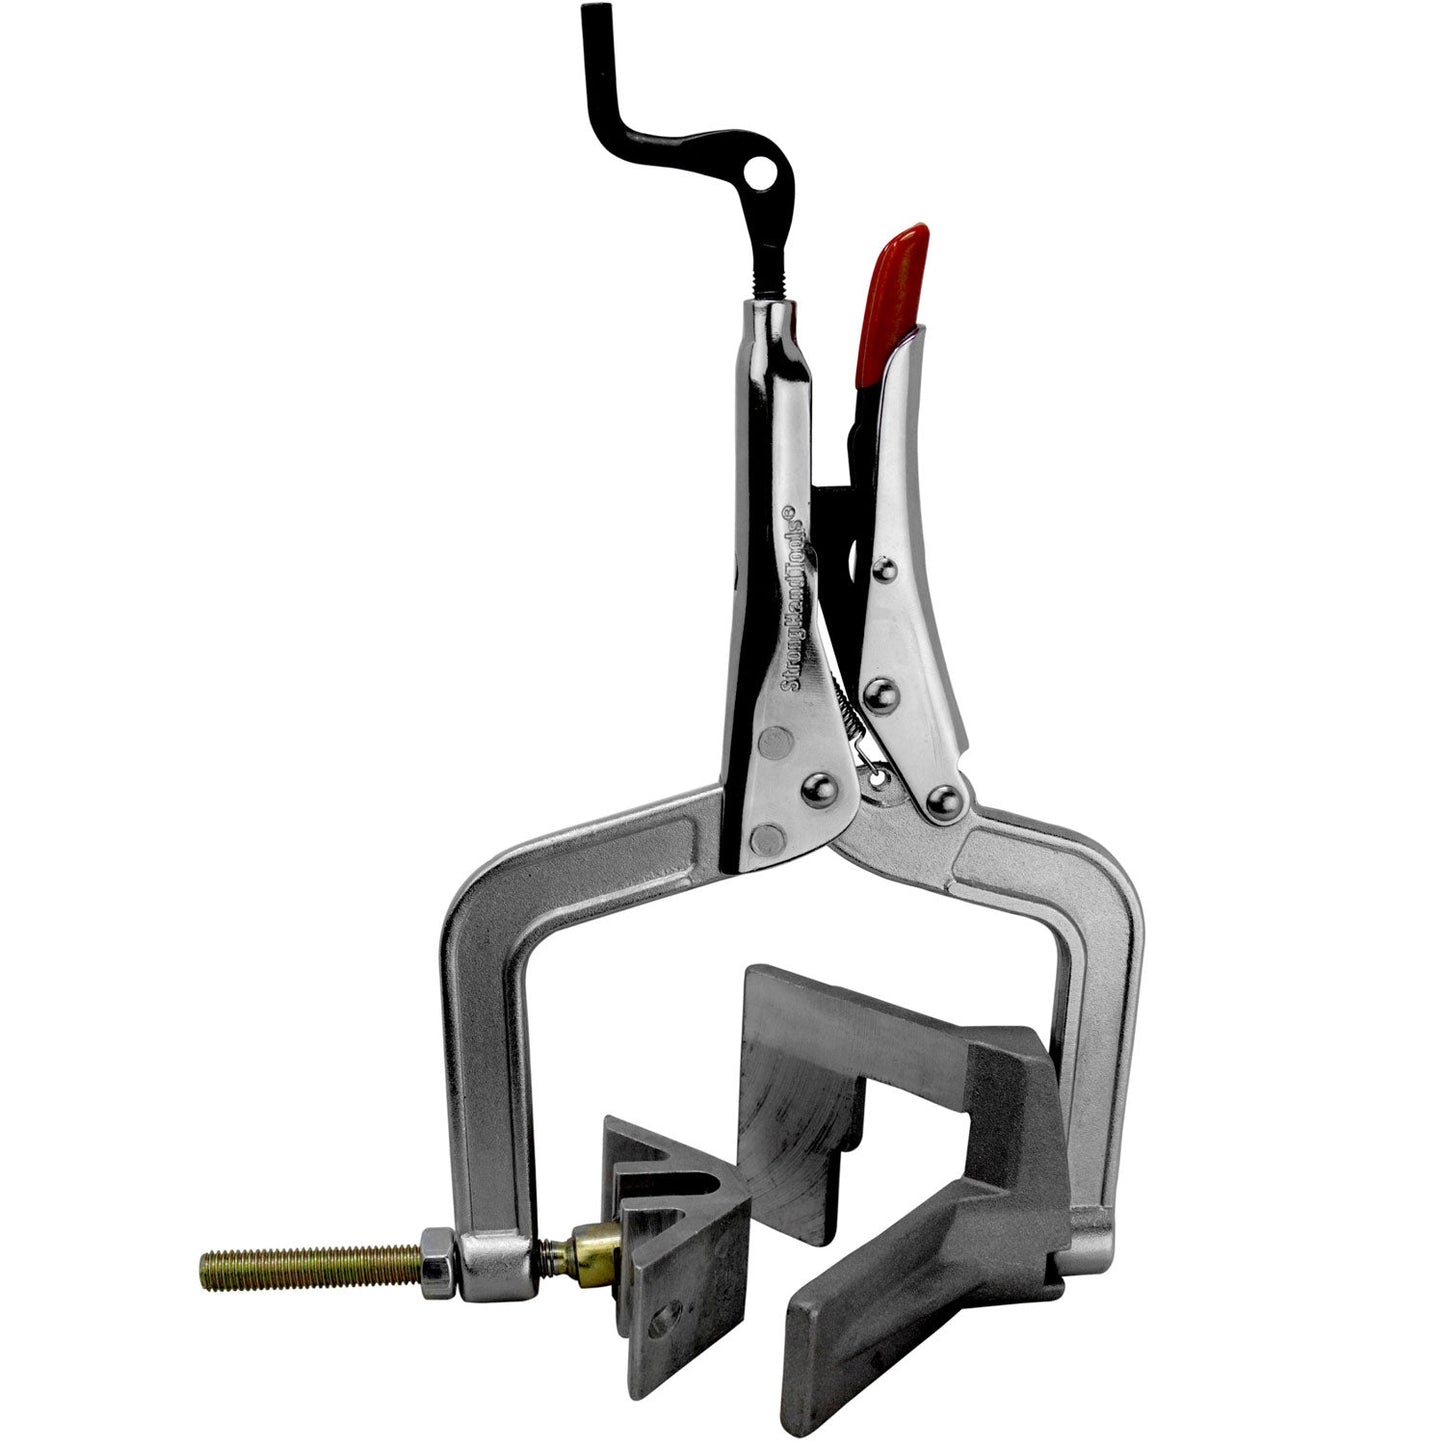 JointMasterâ„¢ Angle Clamping - PL